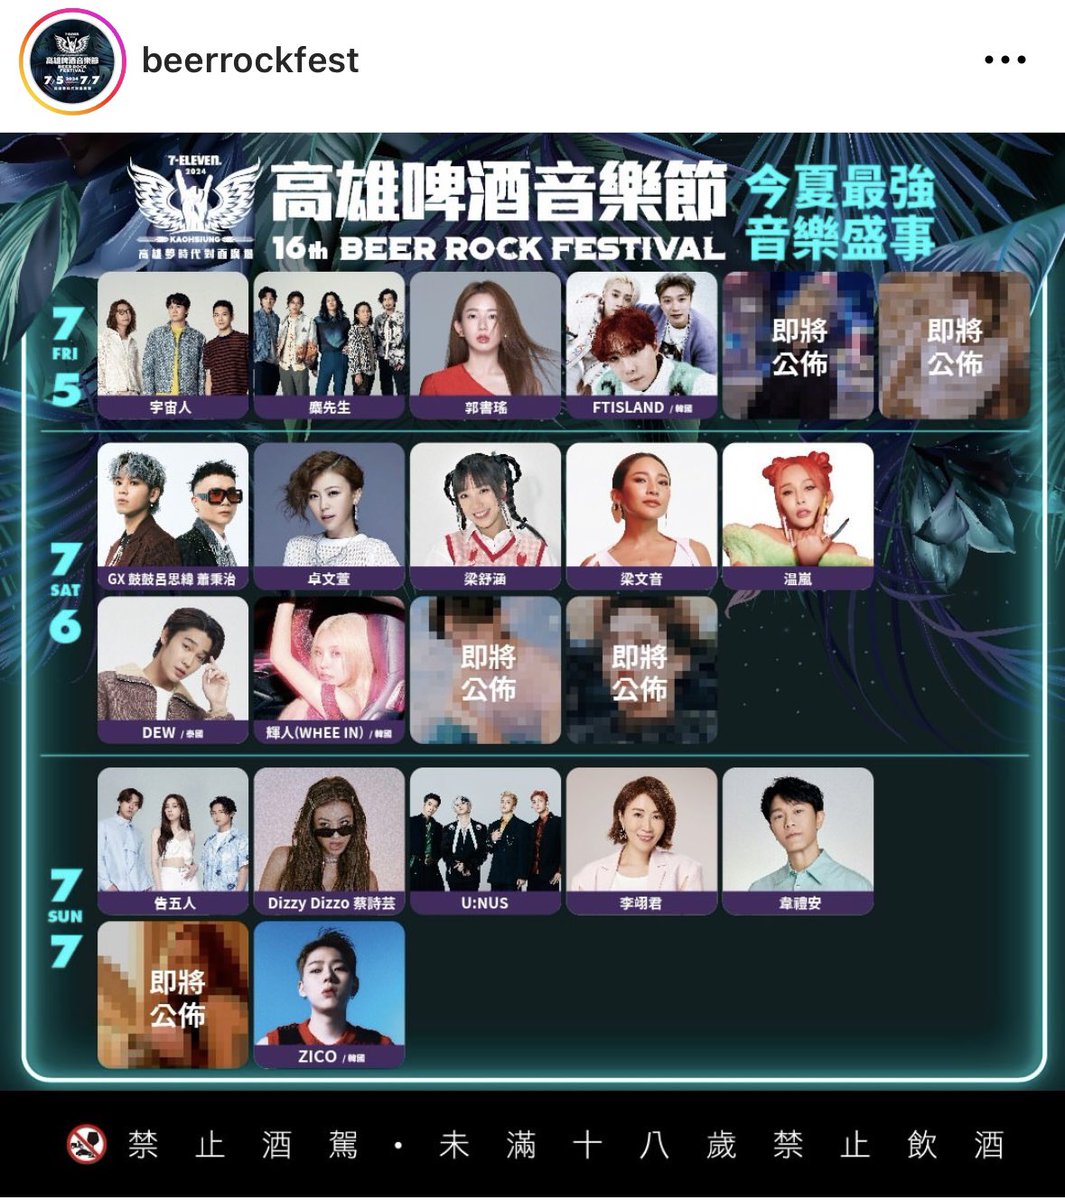 240424 beerrockfest ig post #TAEMIN #태민 @TAEMIN_BPM Taemin is also in the lineup for Beer rock festival in Kaohsiung on July 5th (240705)